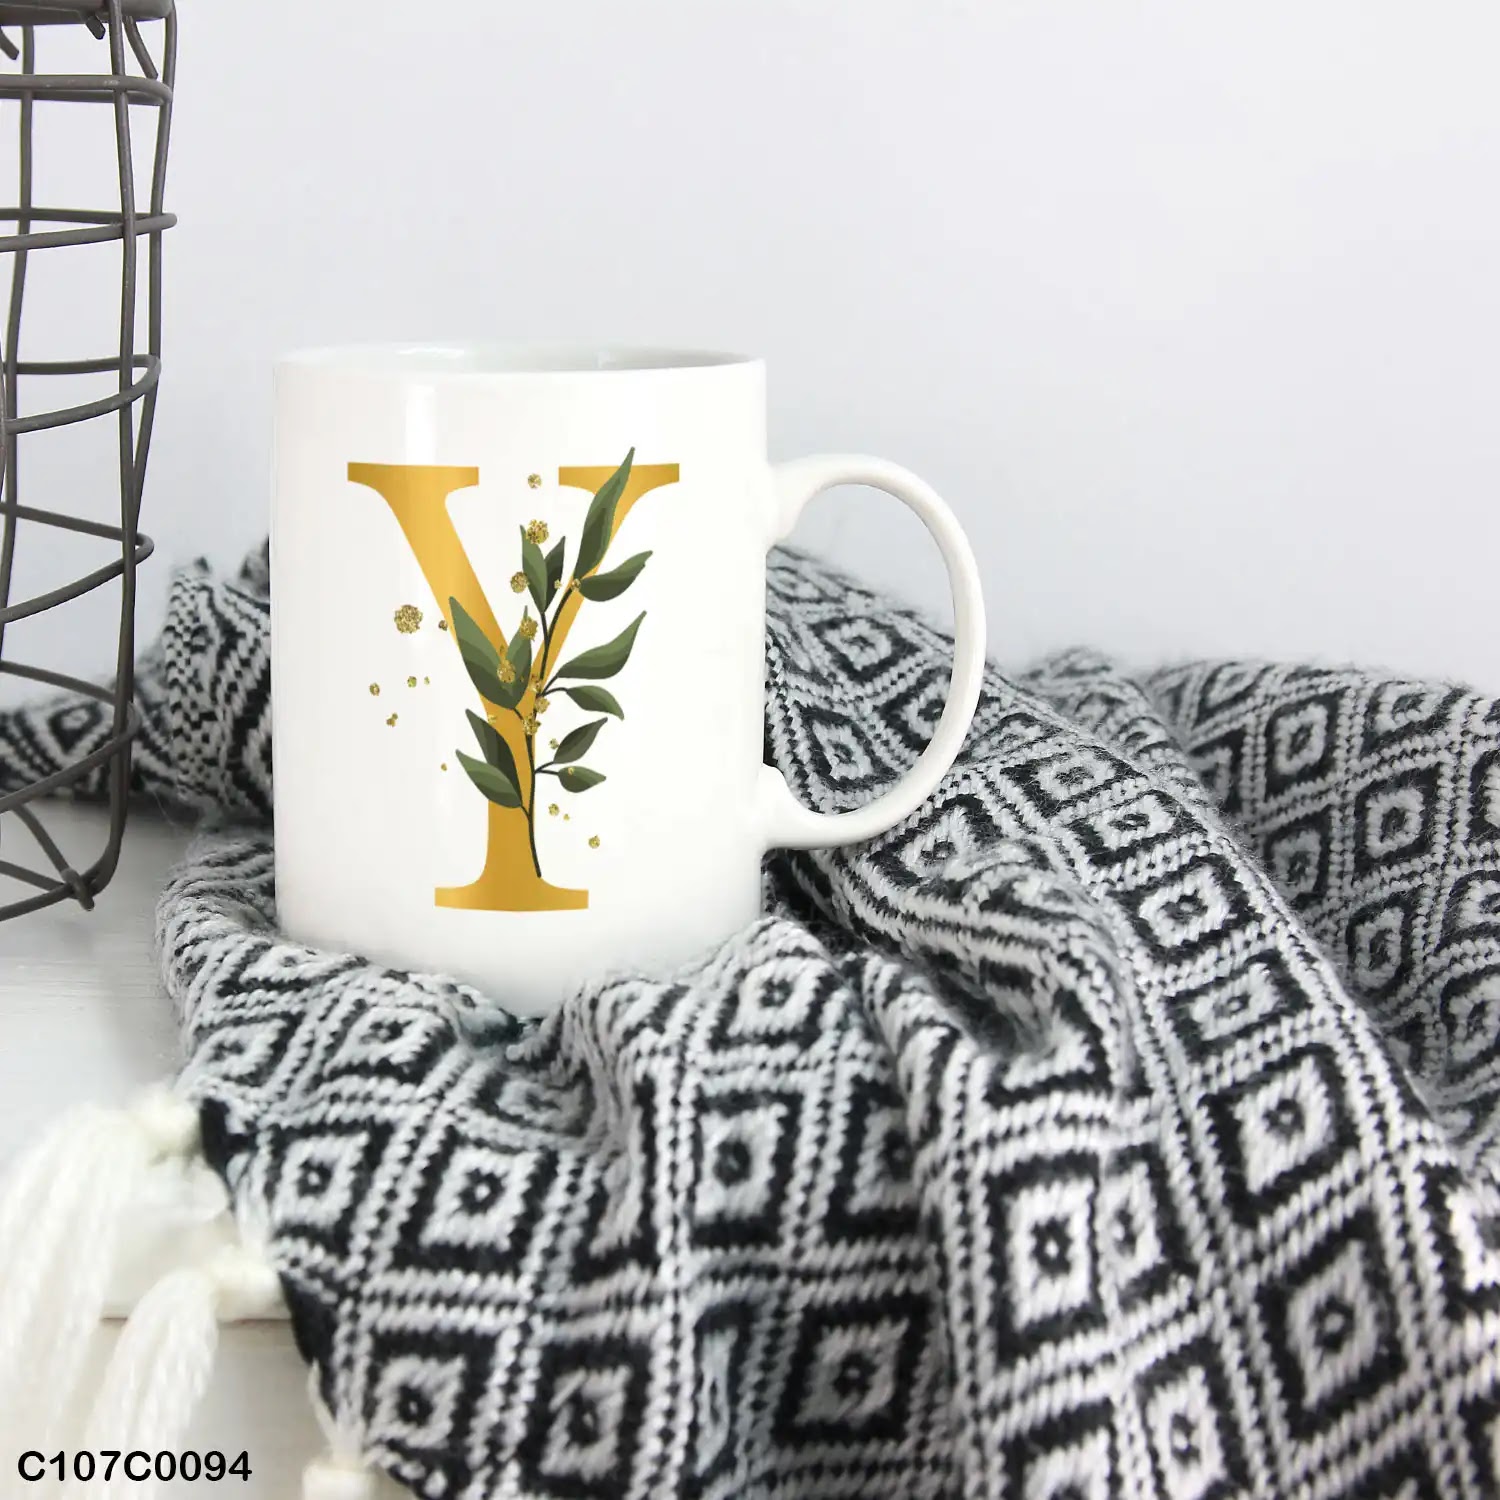 A white mug (cup) printed with gold Letter "Y"and small green branch